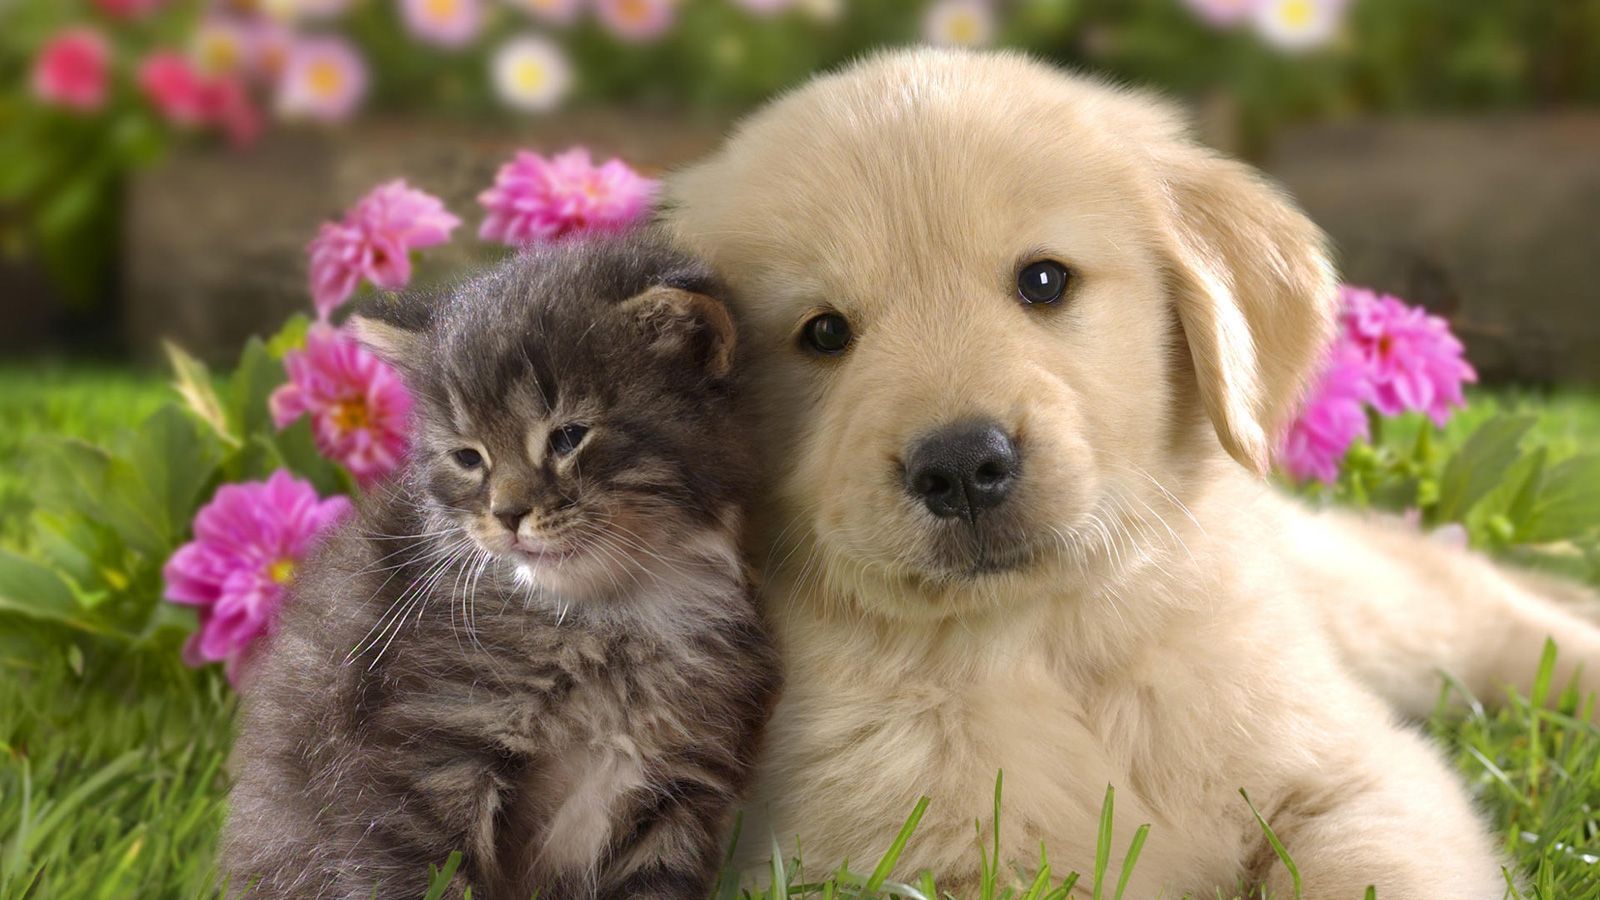 Dogs And Cats Cute Wallpapers - Wallpaper Cave